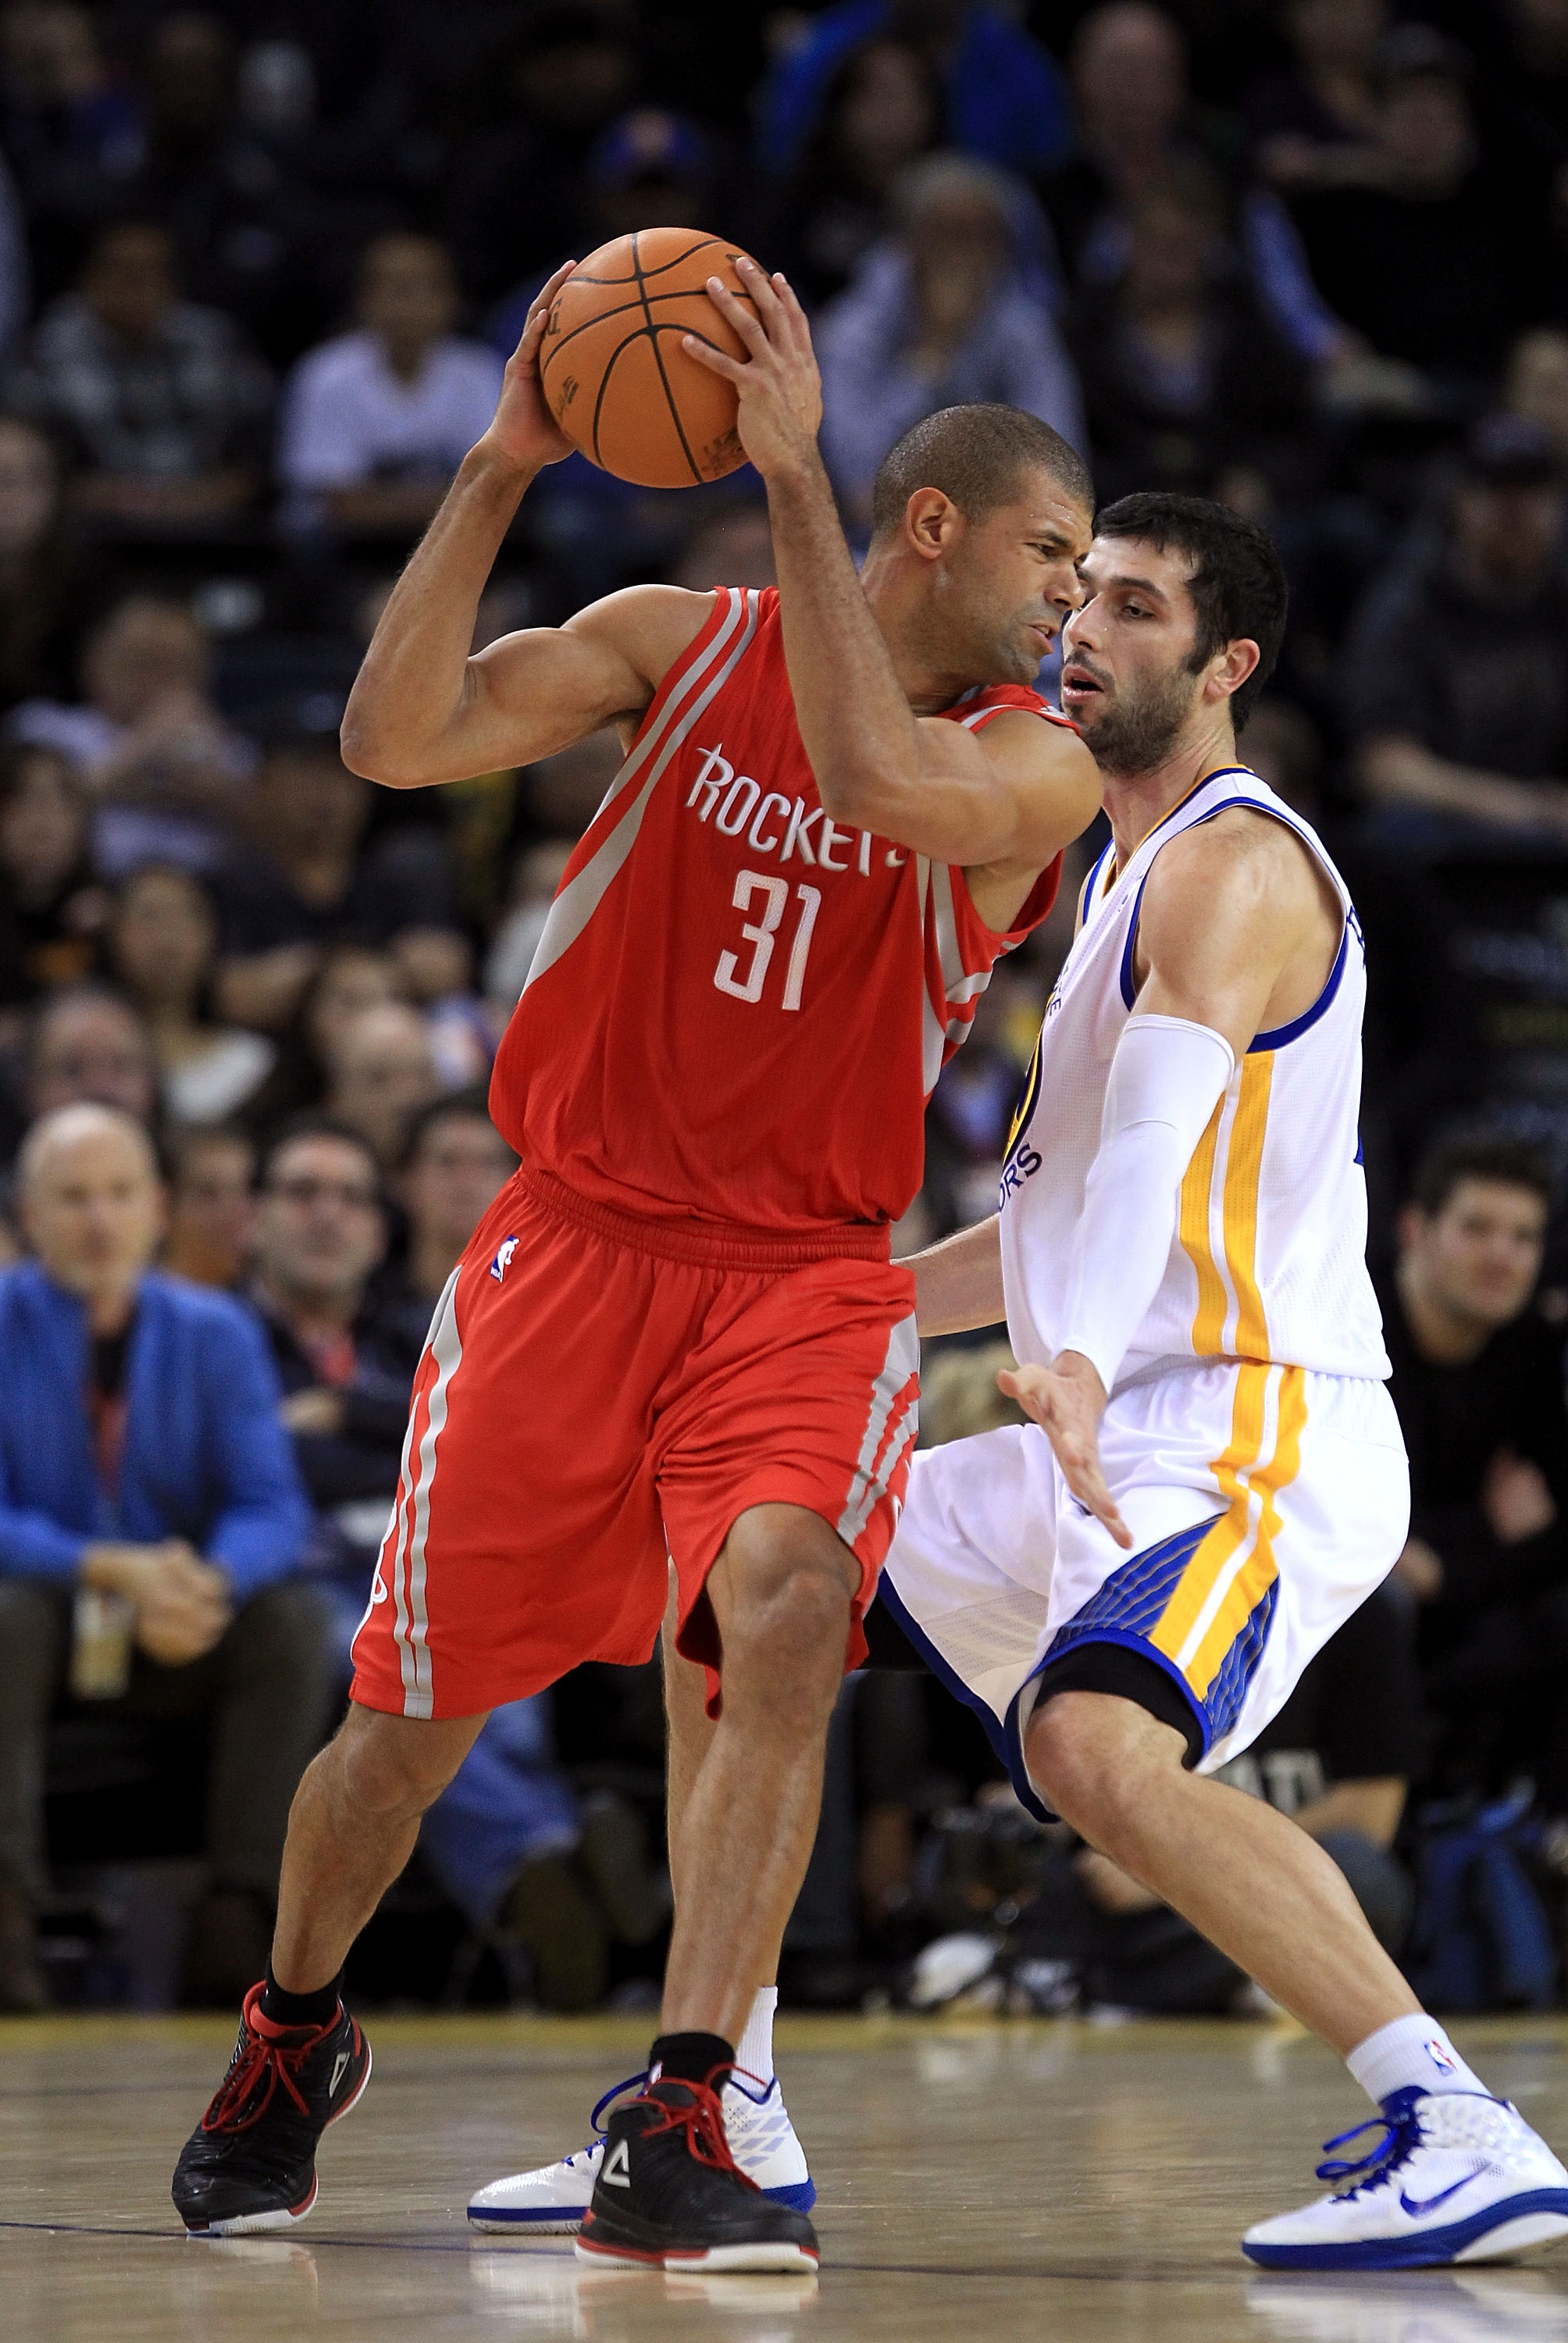 OAKLAND, CA - DECEMBER 20:  Shane Battier #31 of the Houston Rockets in action against the Golden State Warriors at Oracle Arena on December 20, 2010 in Oakland, California. NOTE TO USER: User expressly acknowledges and agrees that, by downloading and or